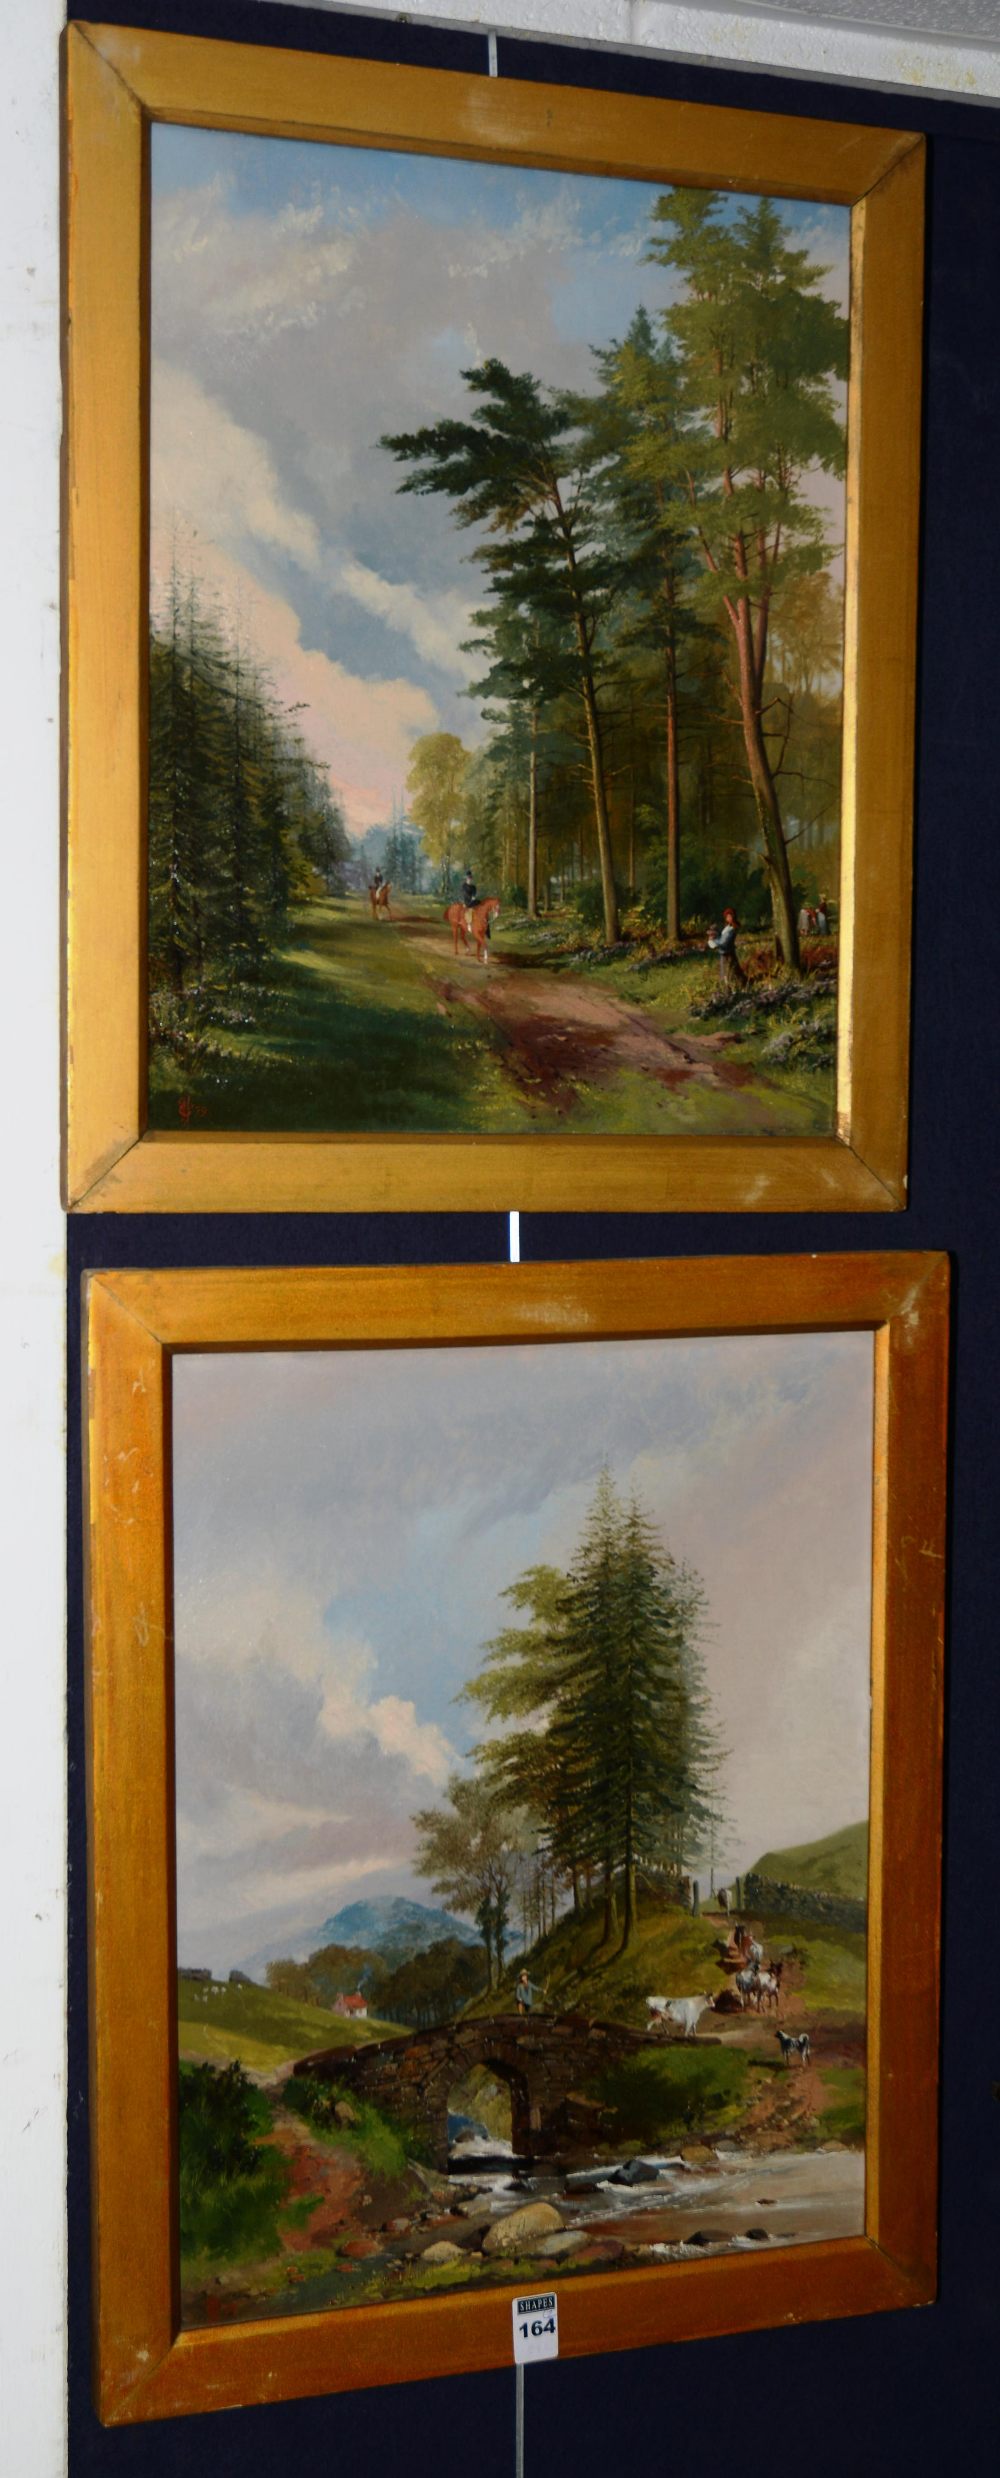 British School
'Riding Through Woods' & 'Droving over the Bridge'
Pair of oil on canvas', canvas